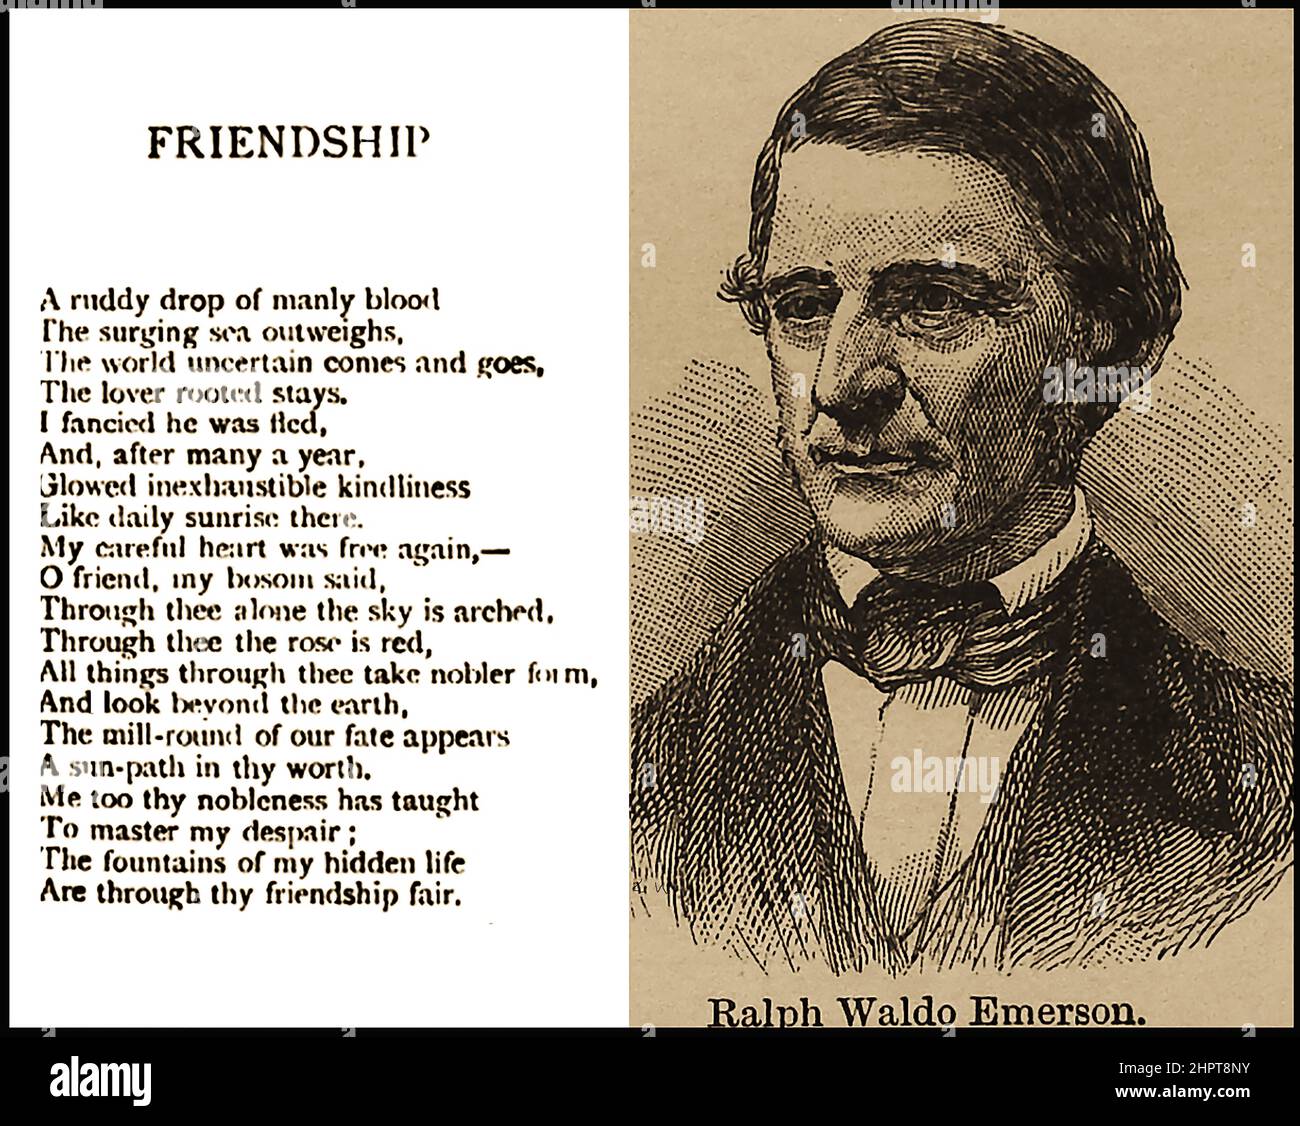 19th century portrait of Ralph Waldo Emerson (1803- 1882) with his poem 'Friendship' .  He was generally known as Waldo Emerson and  was a noted  American poet, lecturer and essayist who subscribed to transcendentalism philosophy, Individualism and  mysticism . He coined the phrase 'Build a better mousetrap and the world will beat a path to your door' Stock Photo